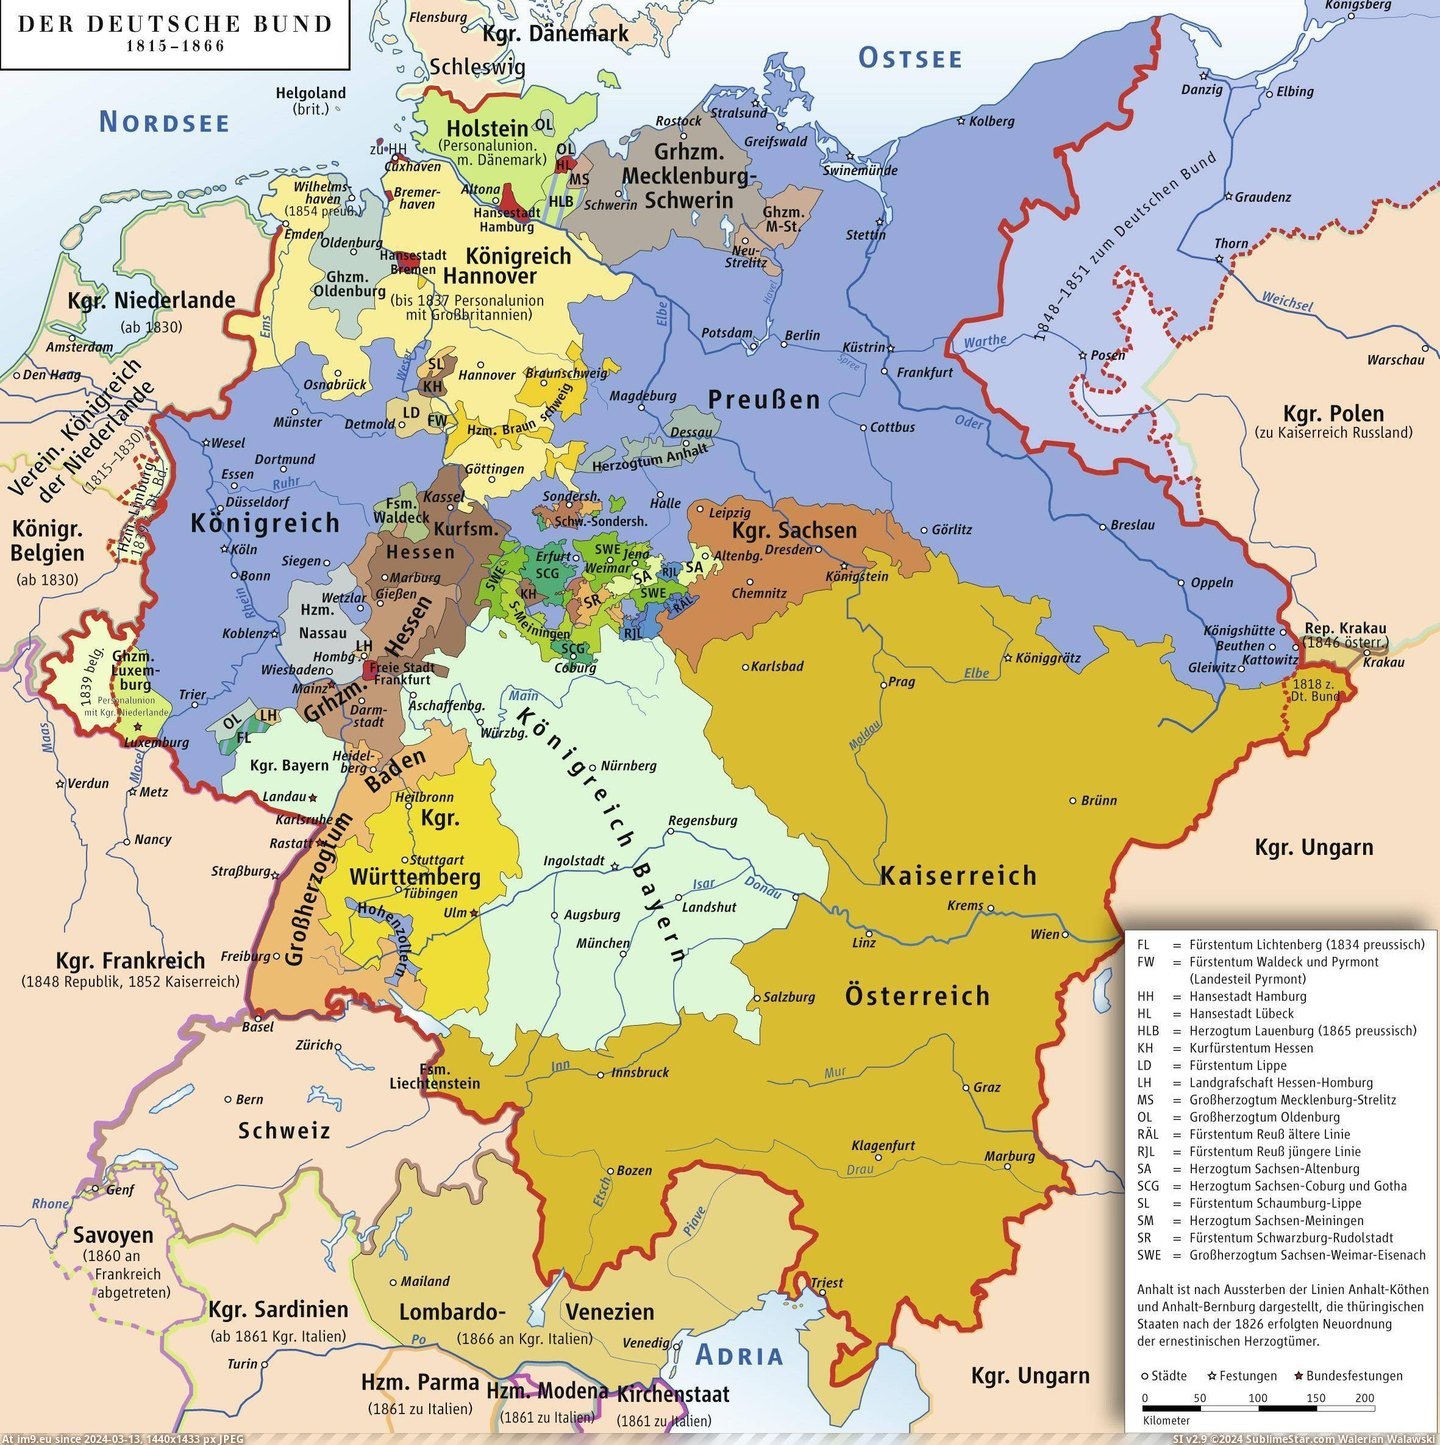  #German  [Mapporn] The German Confederation from 1815 to 1866 [2362x2362] Pic. (Image of album My r/MAPS favs))